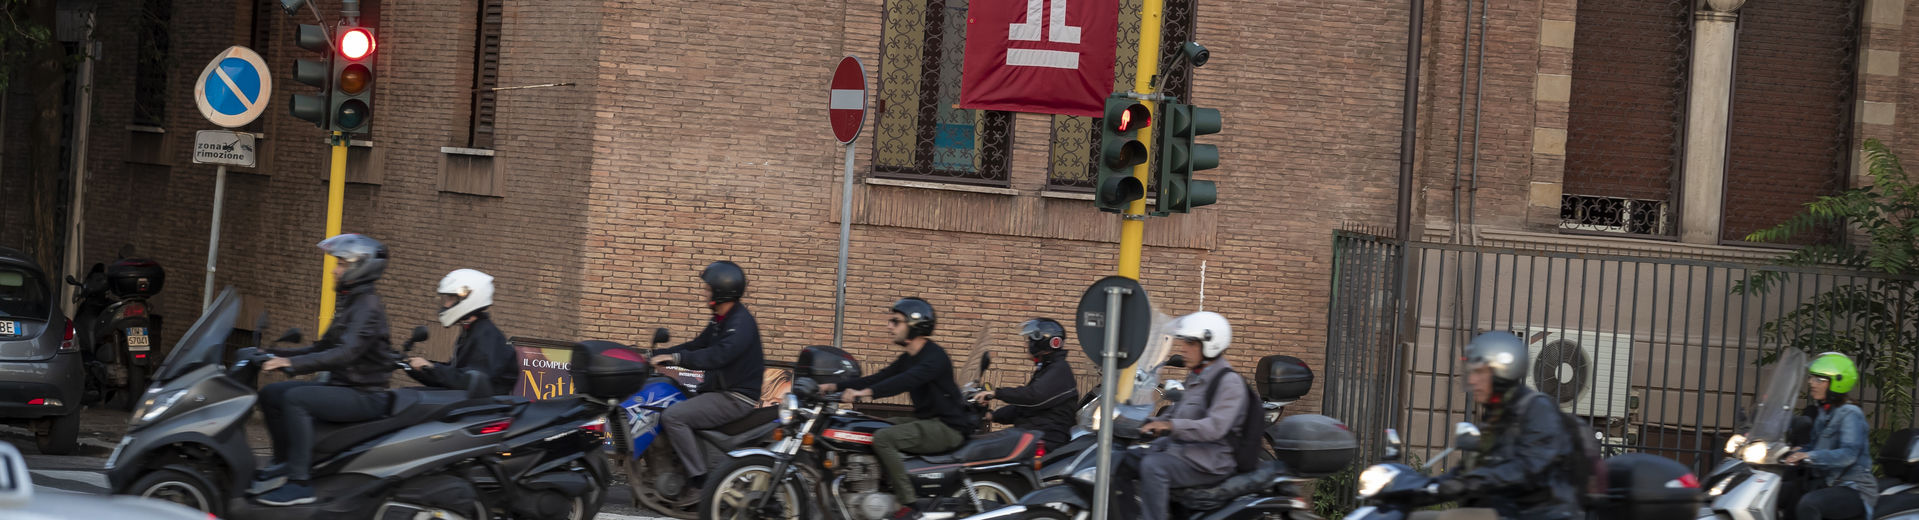 A group of people on motorcycles on an Italian street near Temple Rome.